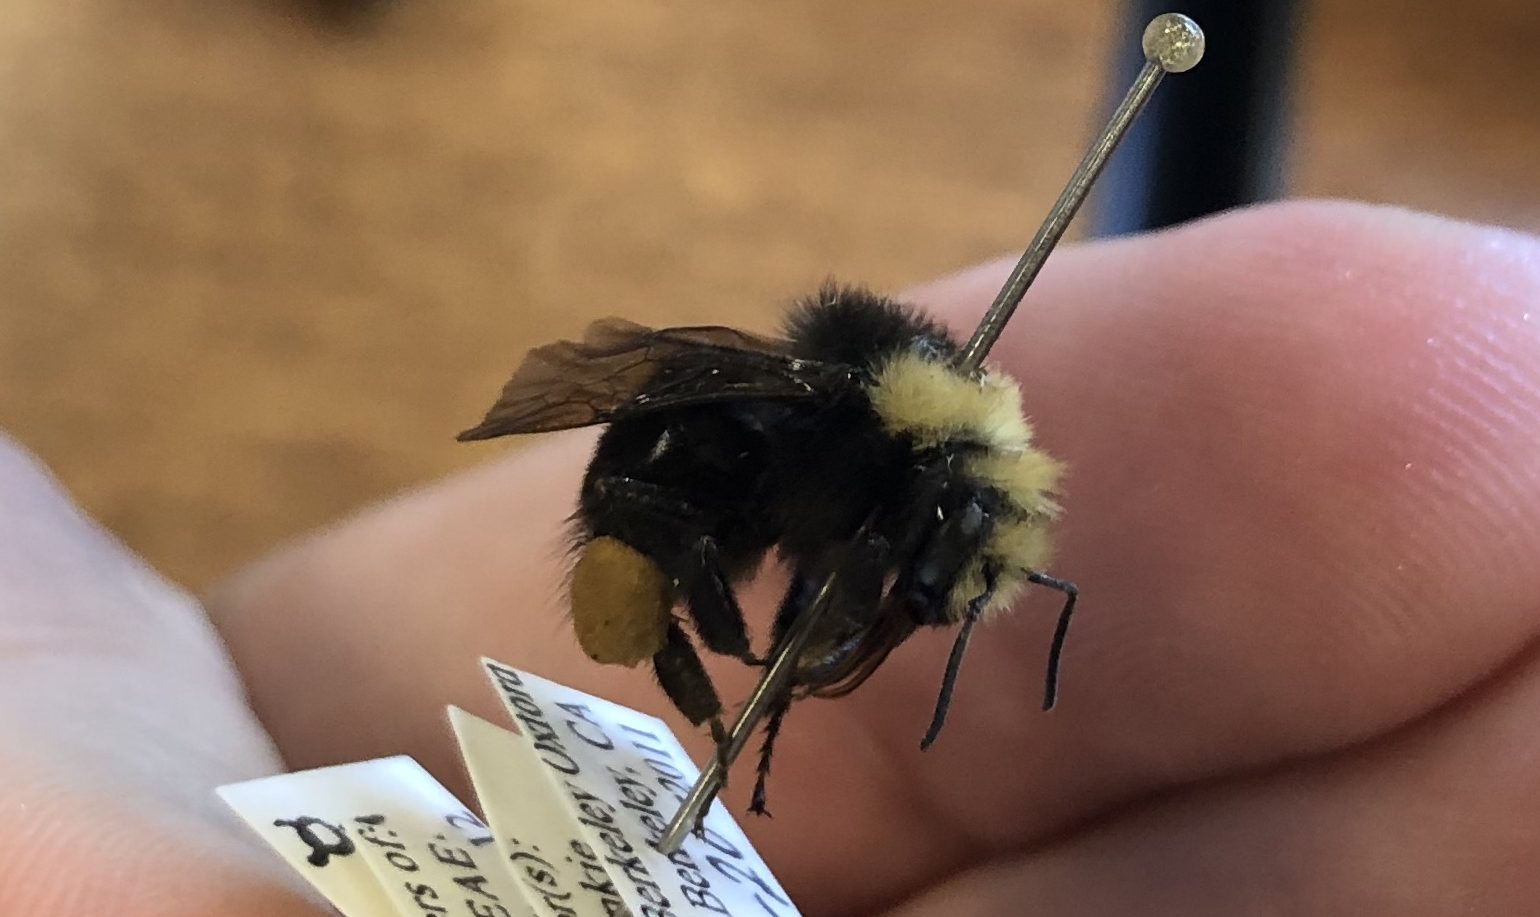 Bumble Bees May Be Eligible for Listing under California ESA